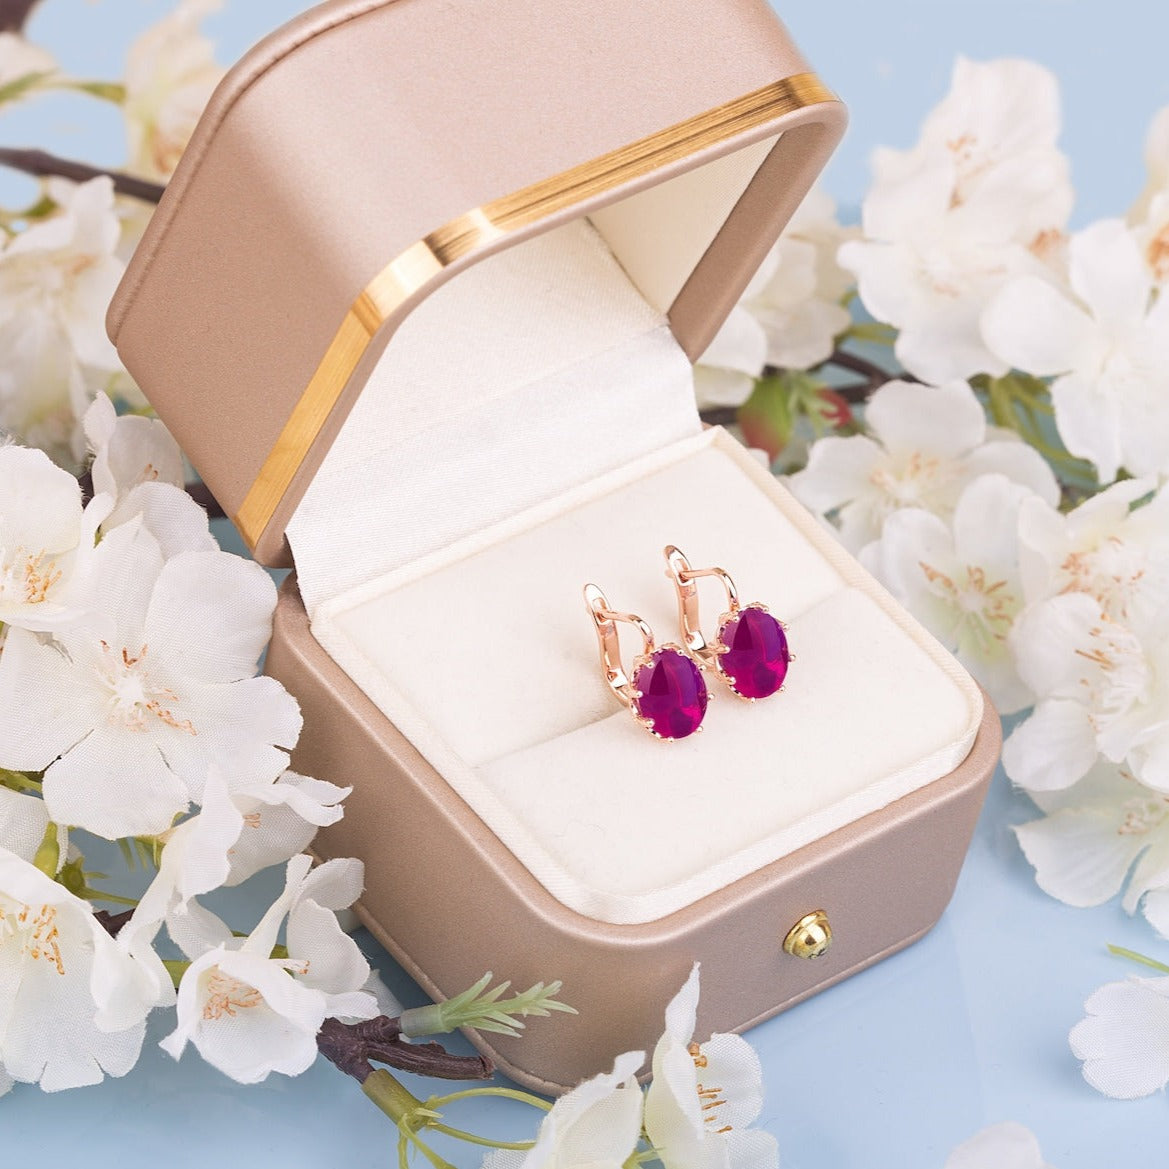 Two Red Ruby vintage earrings in a gift box